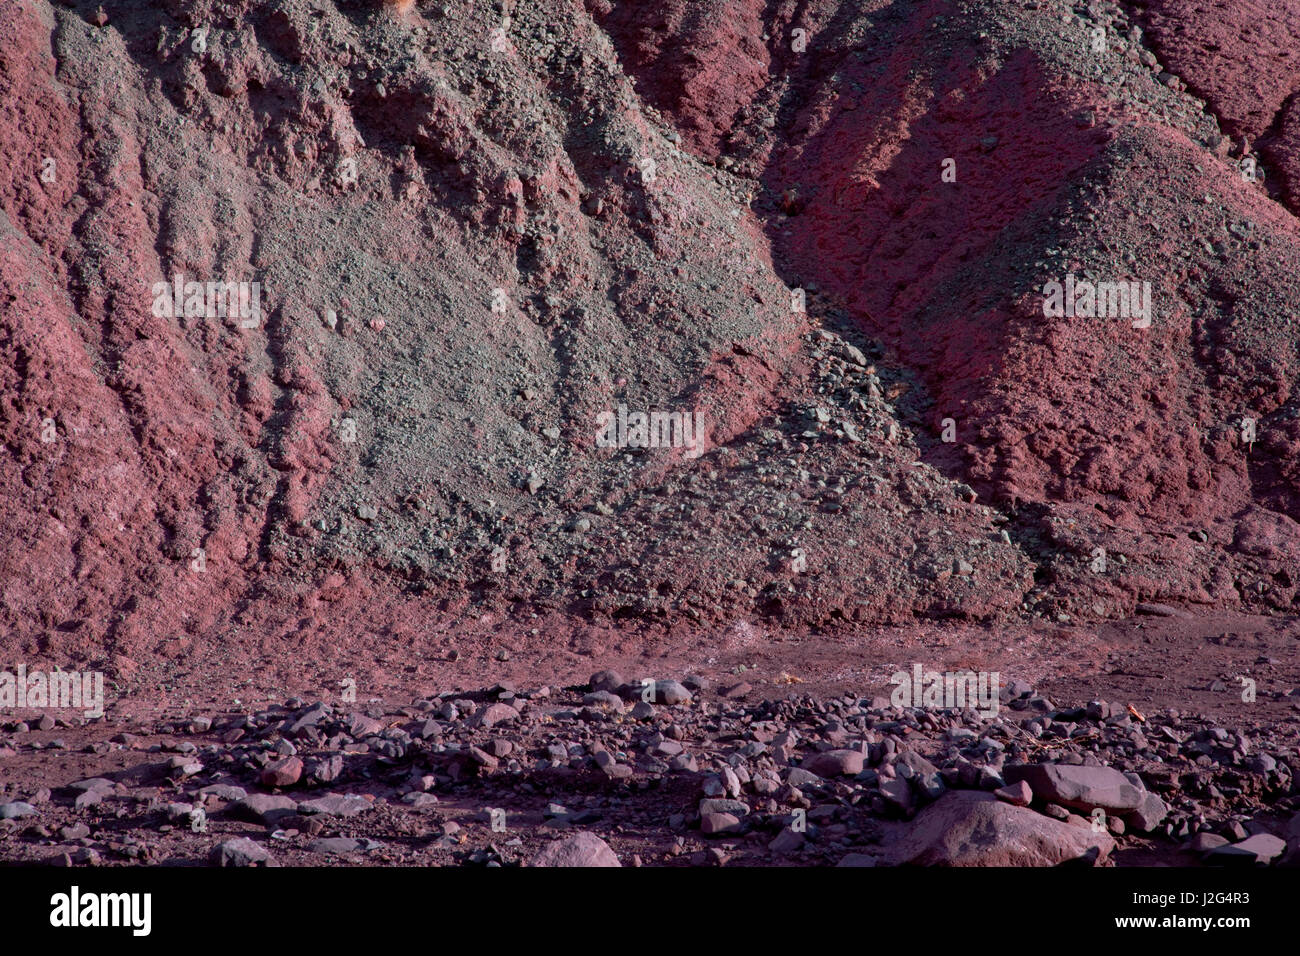 A close-up look at the mineral rich rock formations of Rainbow Valley, found in the Domeyko mountains of the Atacama desert in Chile. Stock Photo